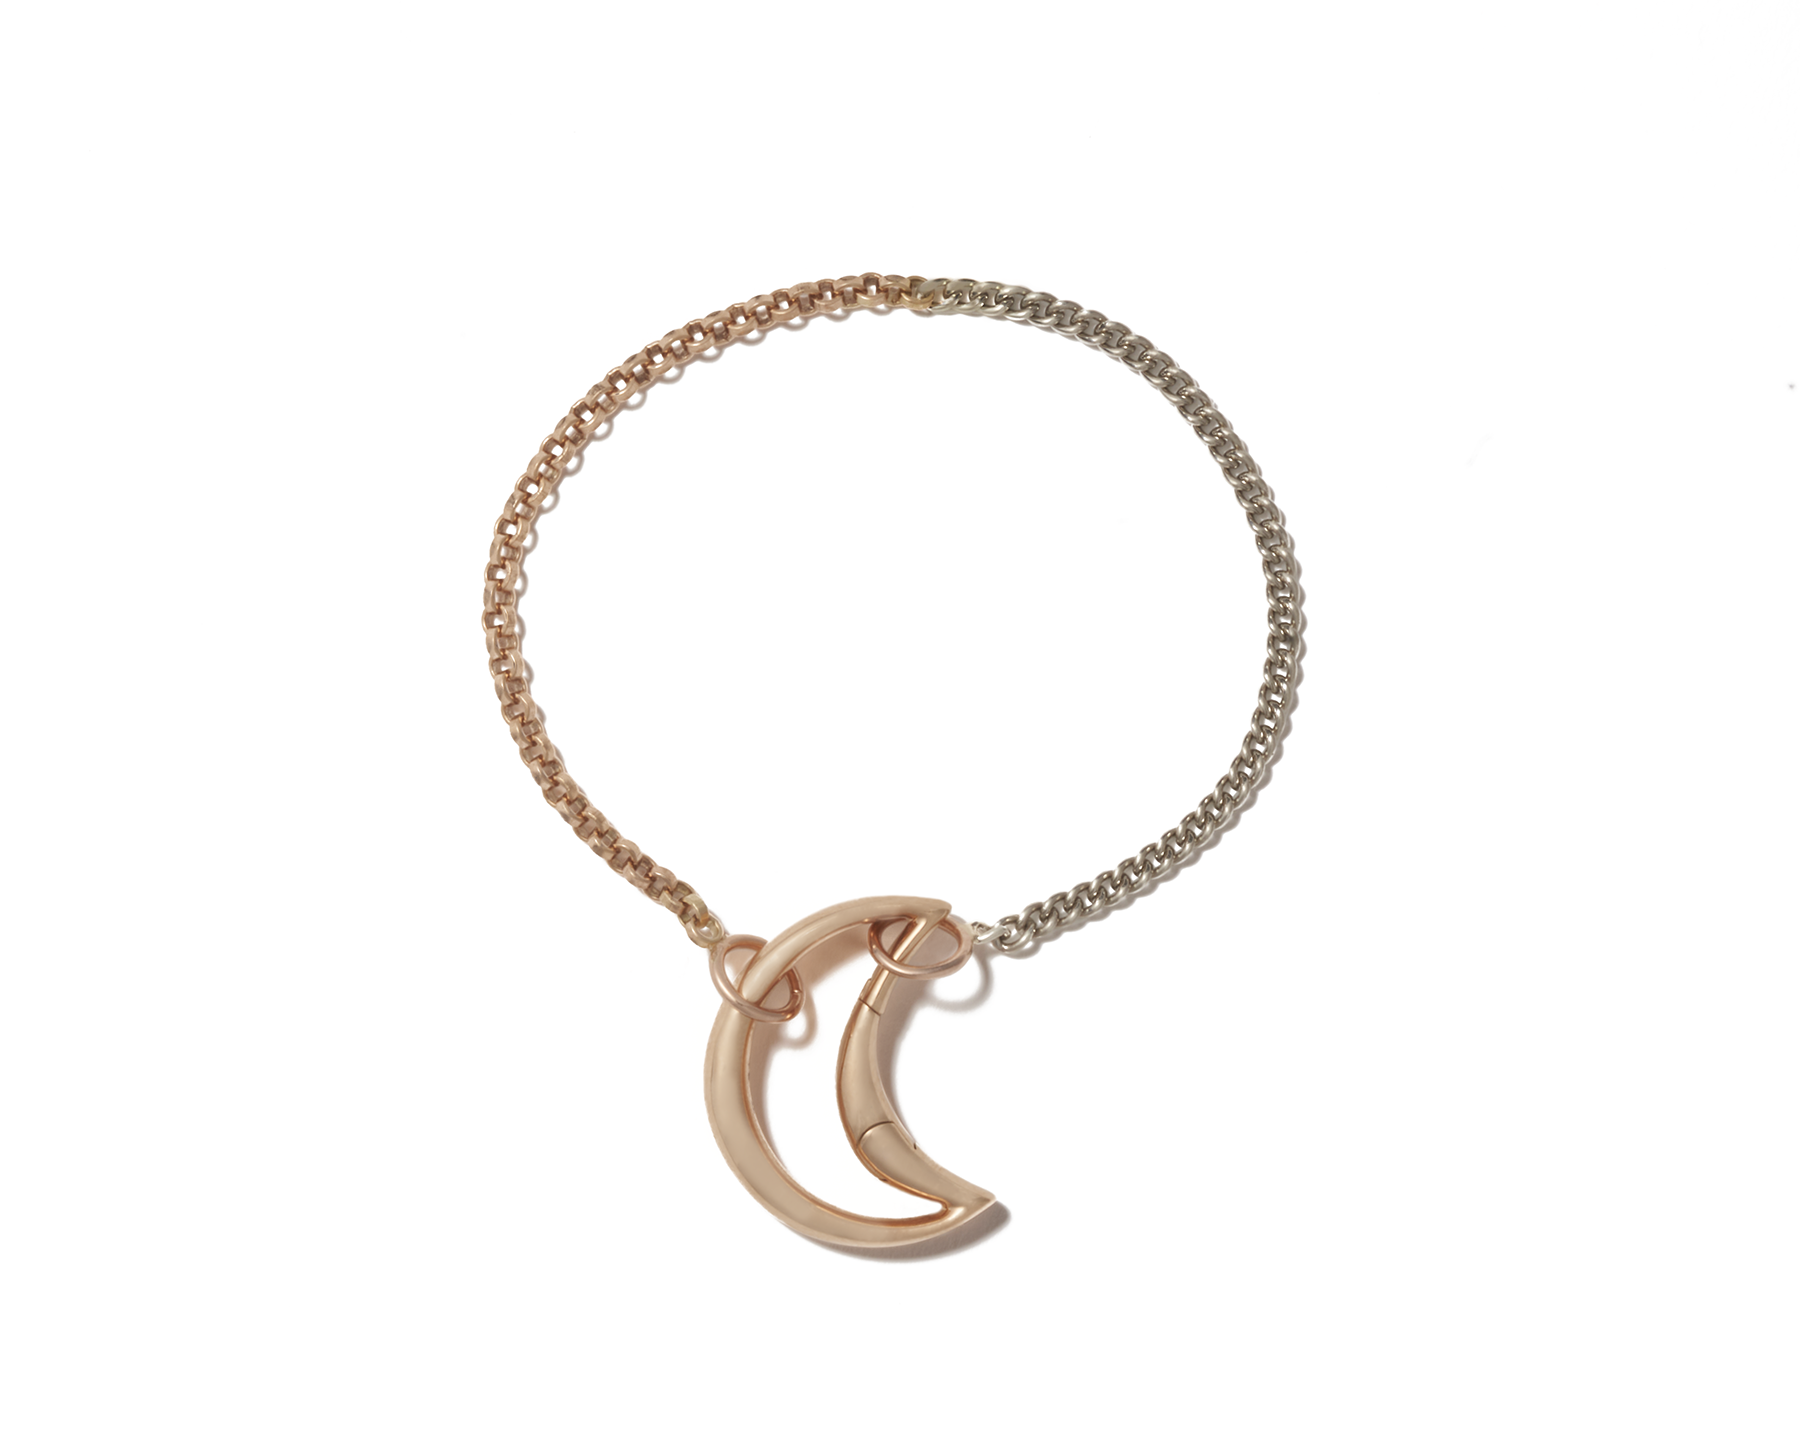 Two-tone bracelet with gold moon lock